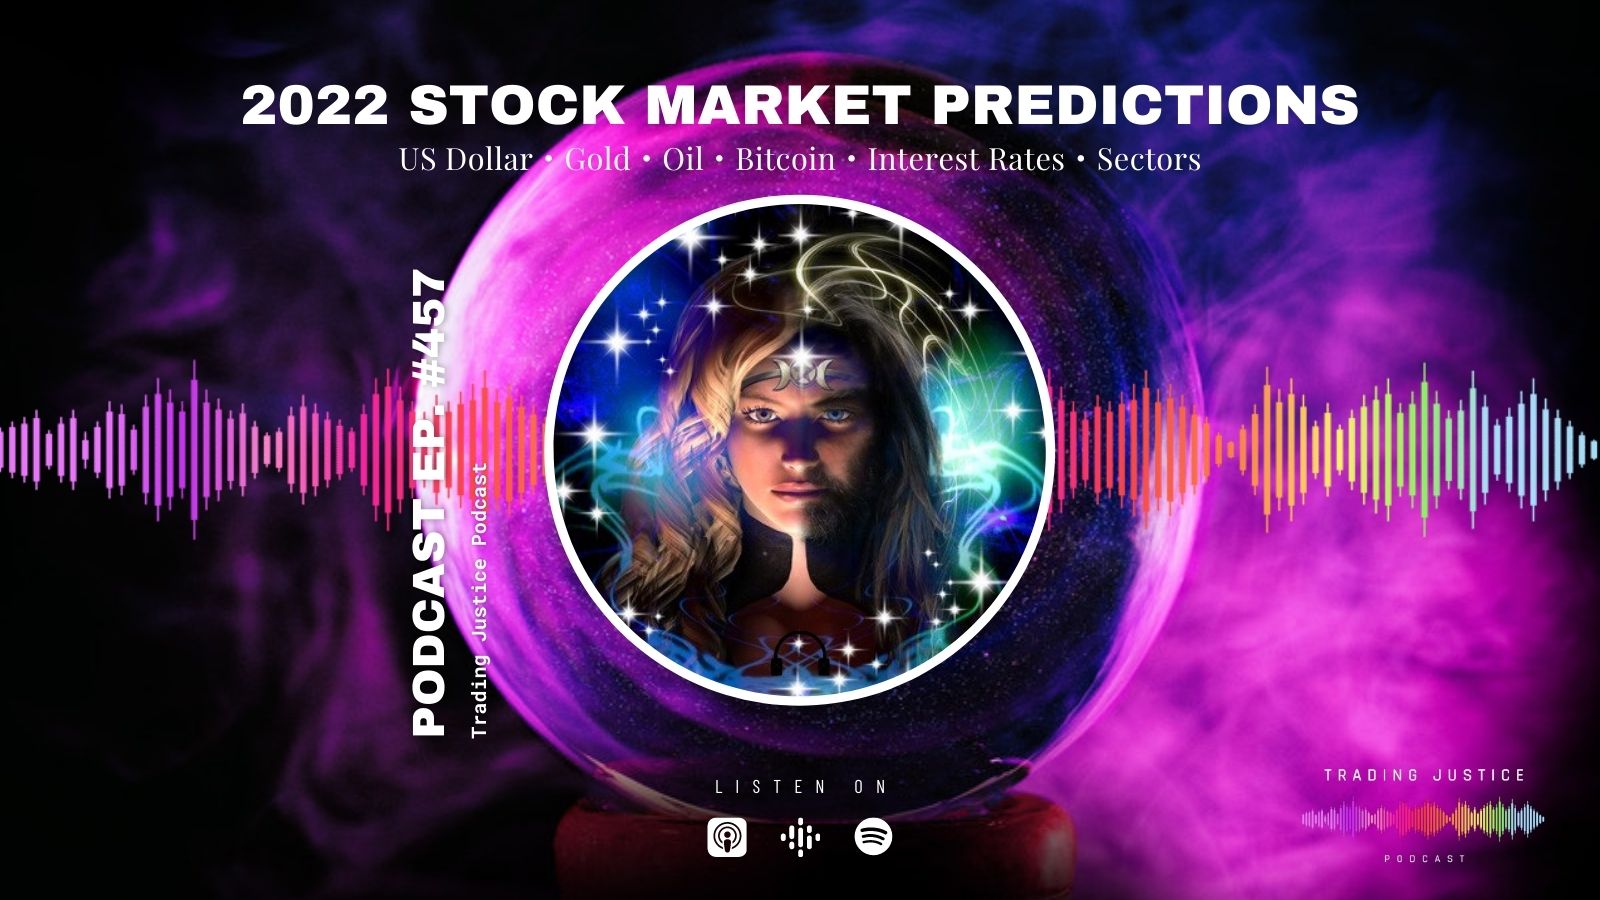 Trading Justice 457: 2022 Stock Market Predictions